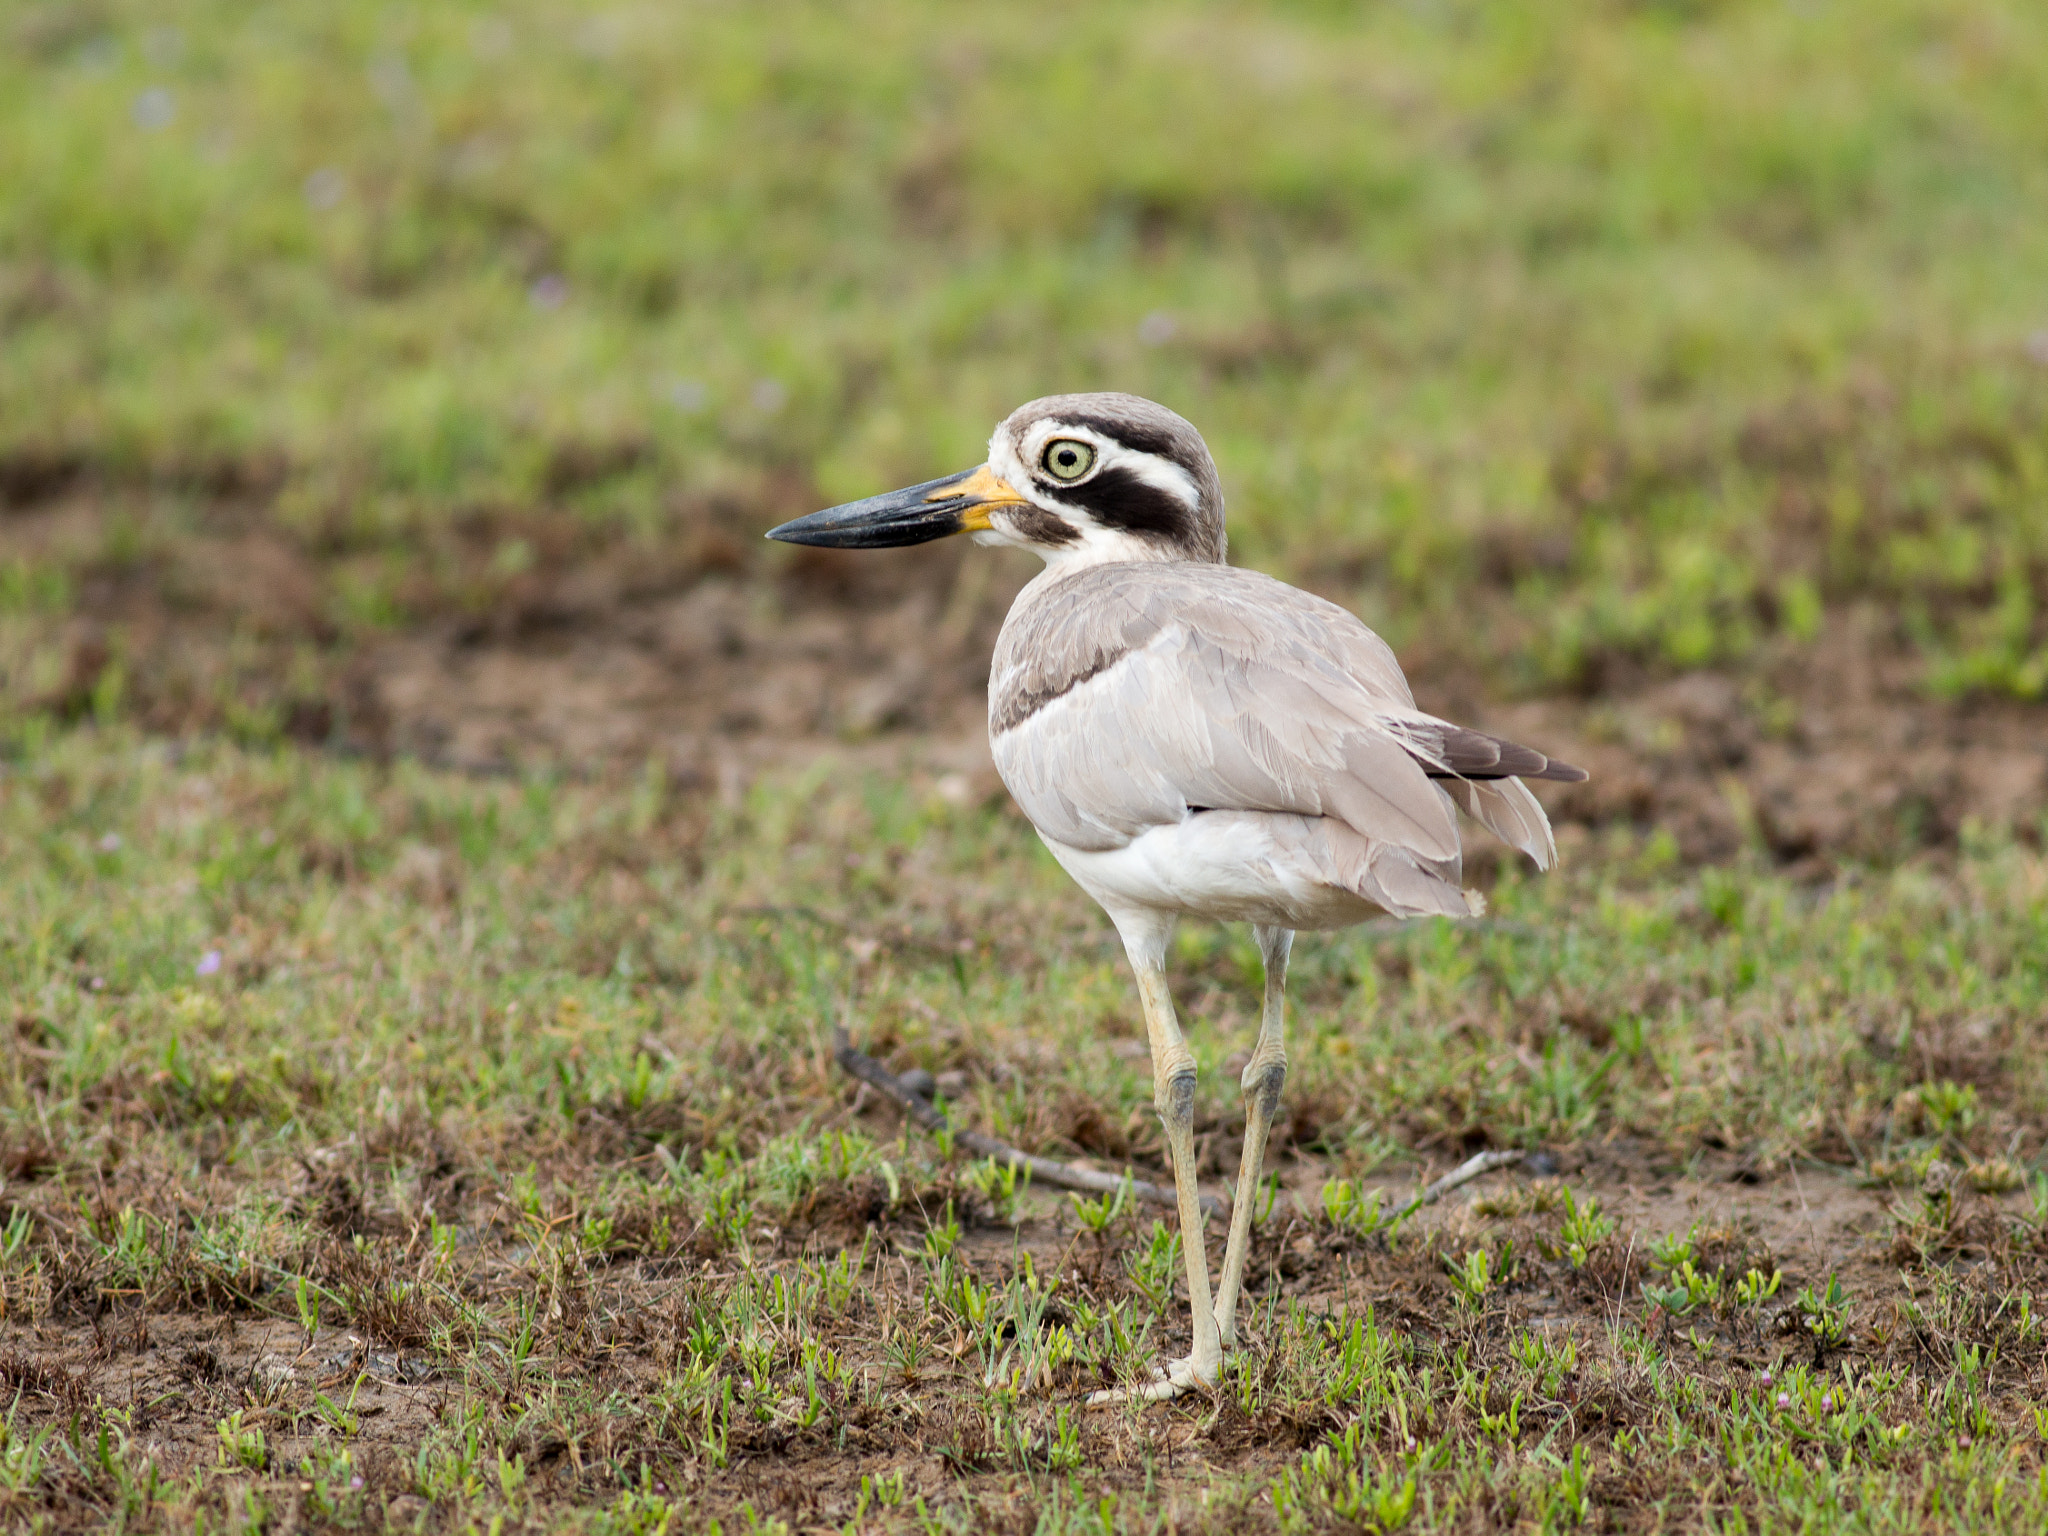 Metabones 400/5.6 sample photo. Great thick-knee photography